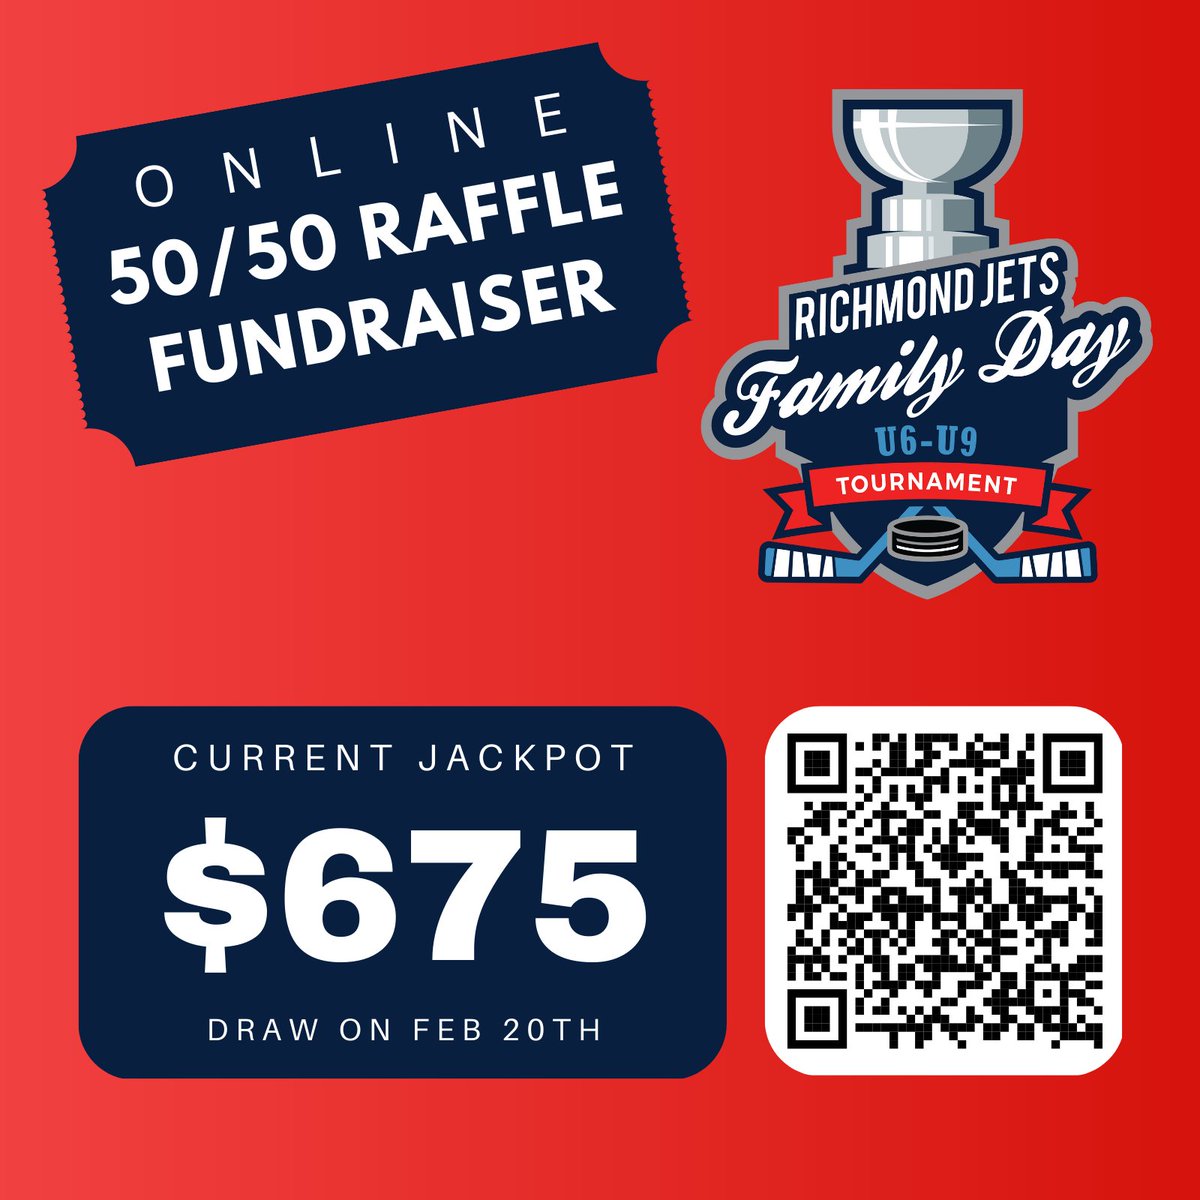 🎉🎉 The jackpot for our 50/50 raffle is now at $675! That's enough to buy 67 inflatable unicorn pool floats. 🦄💦 Don't miss your chance to win big and support a great cause! #Jackpot #5050Raffle #UnicornDreams 🌈💰 #JetsFamilyDayTournament #PCAHA